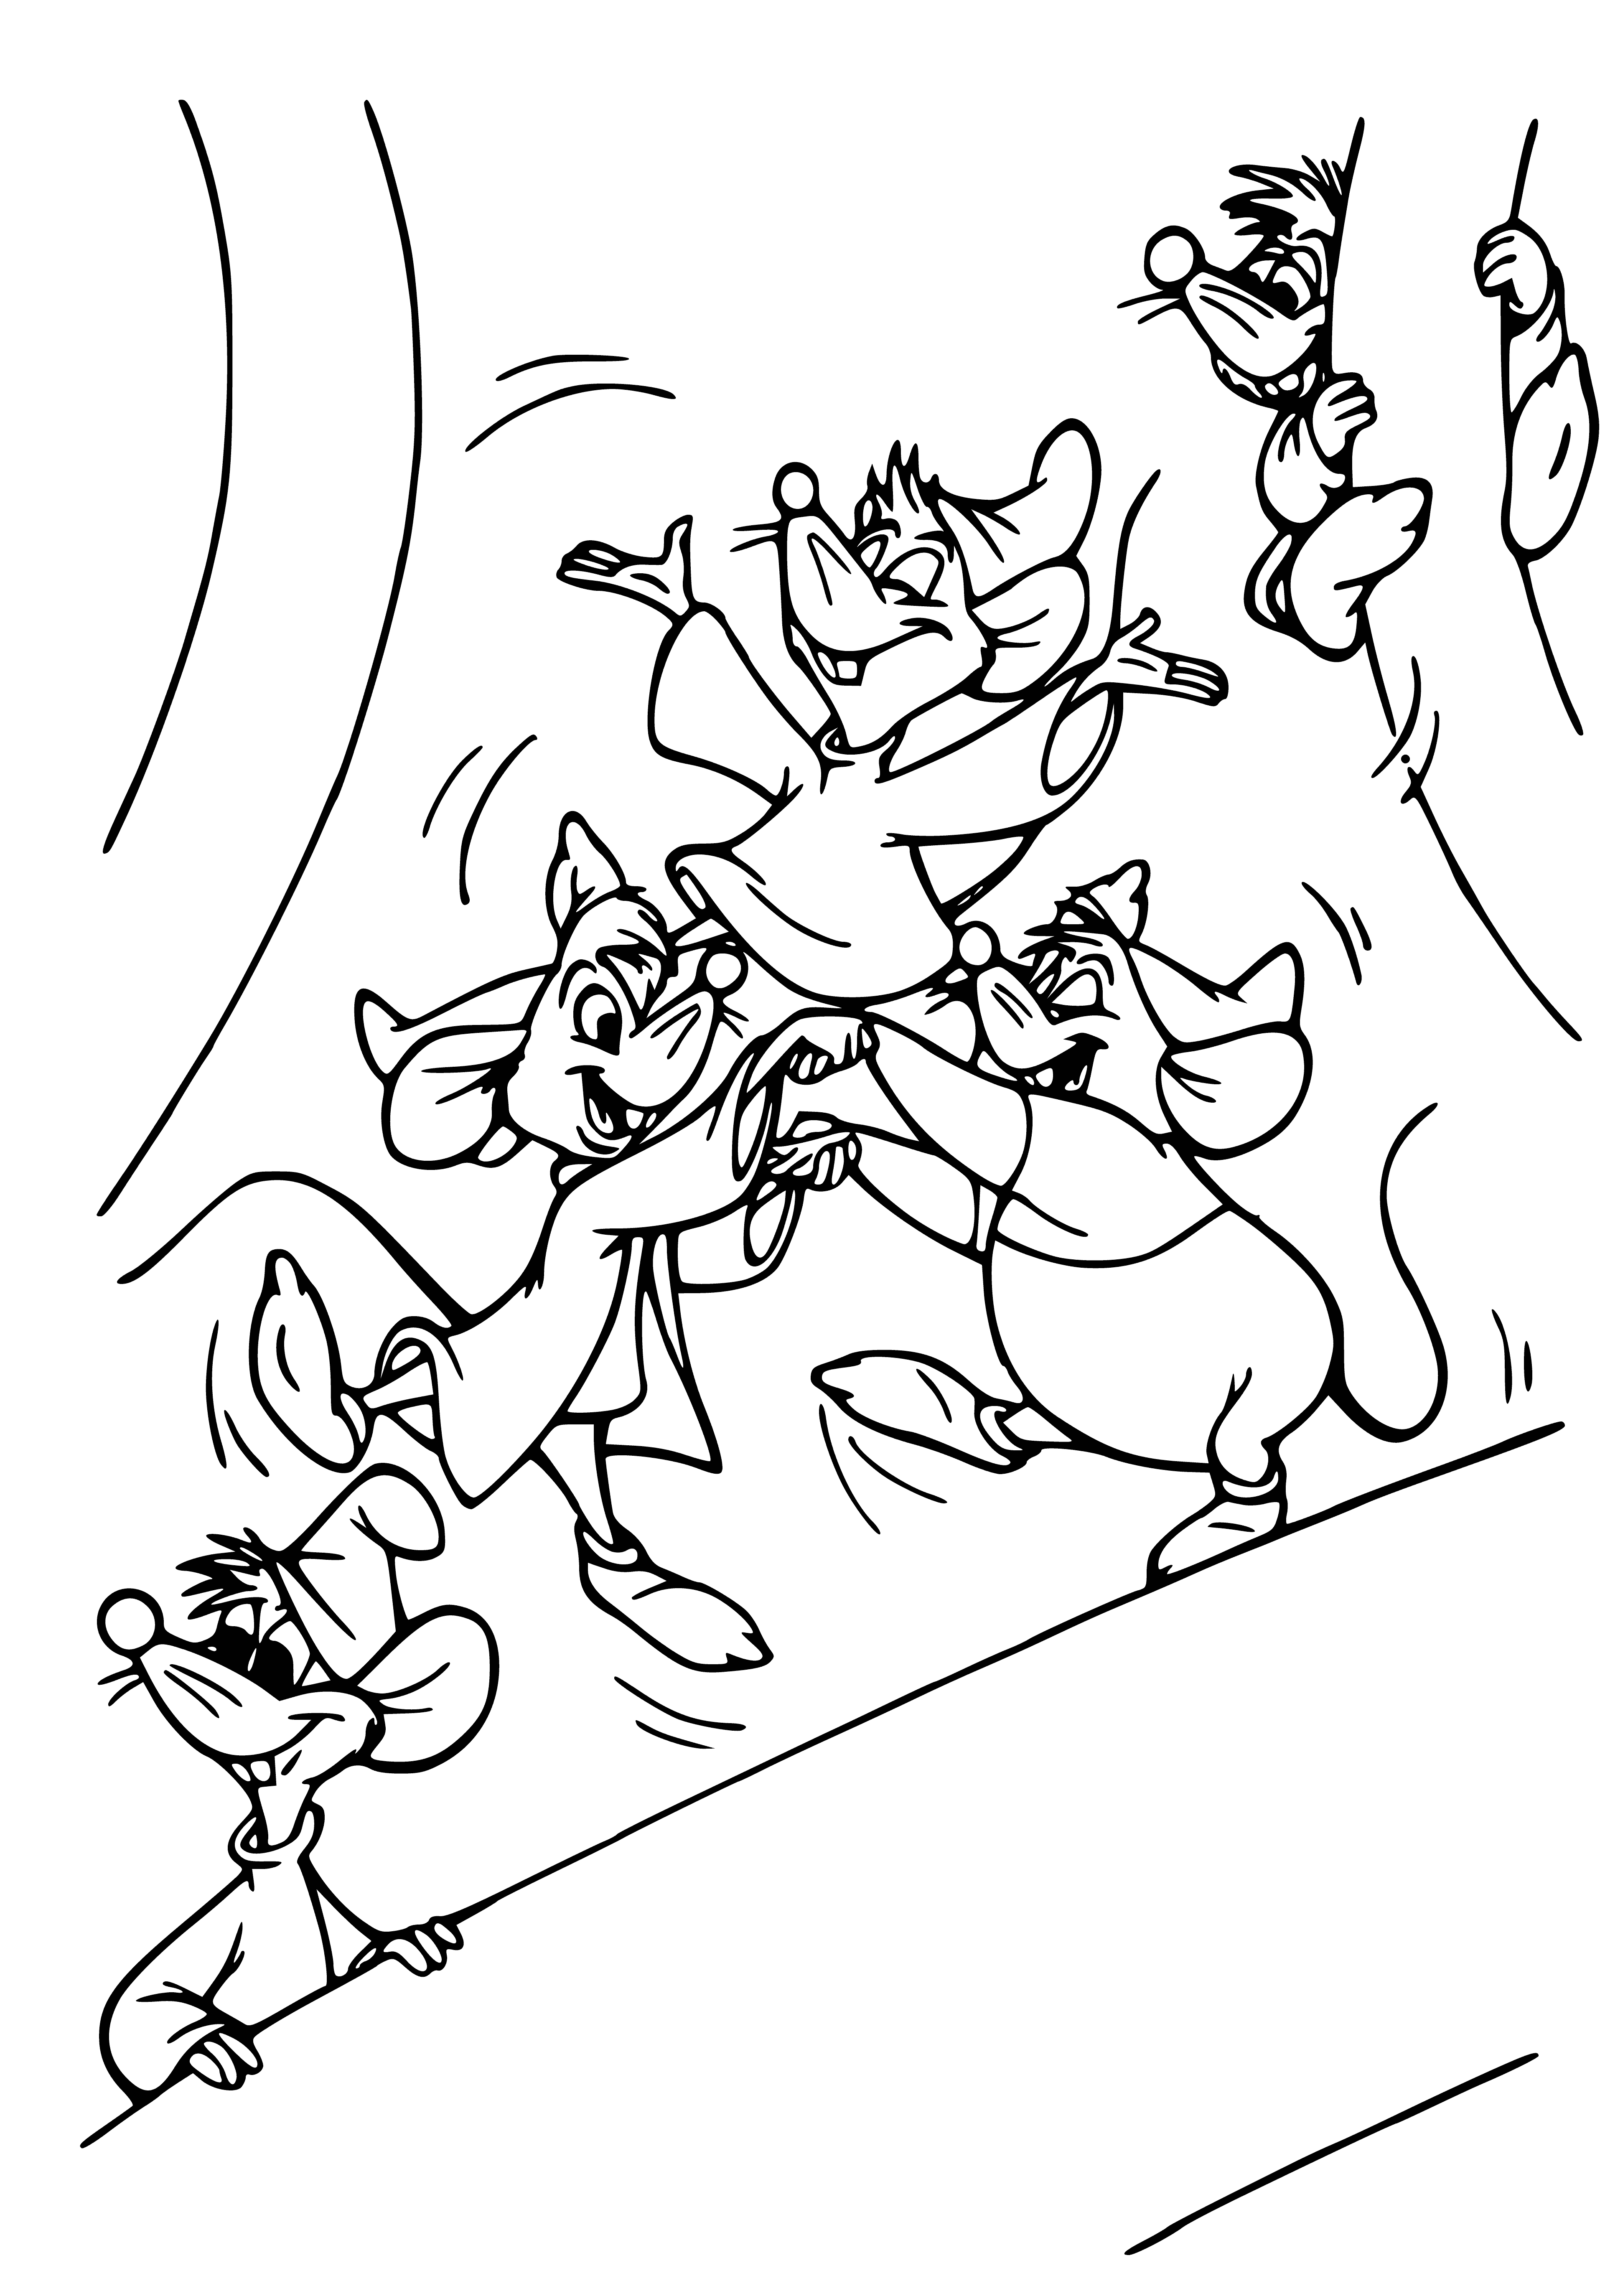 The mice are delighted coloring page